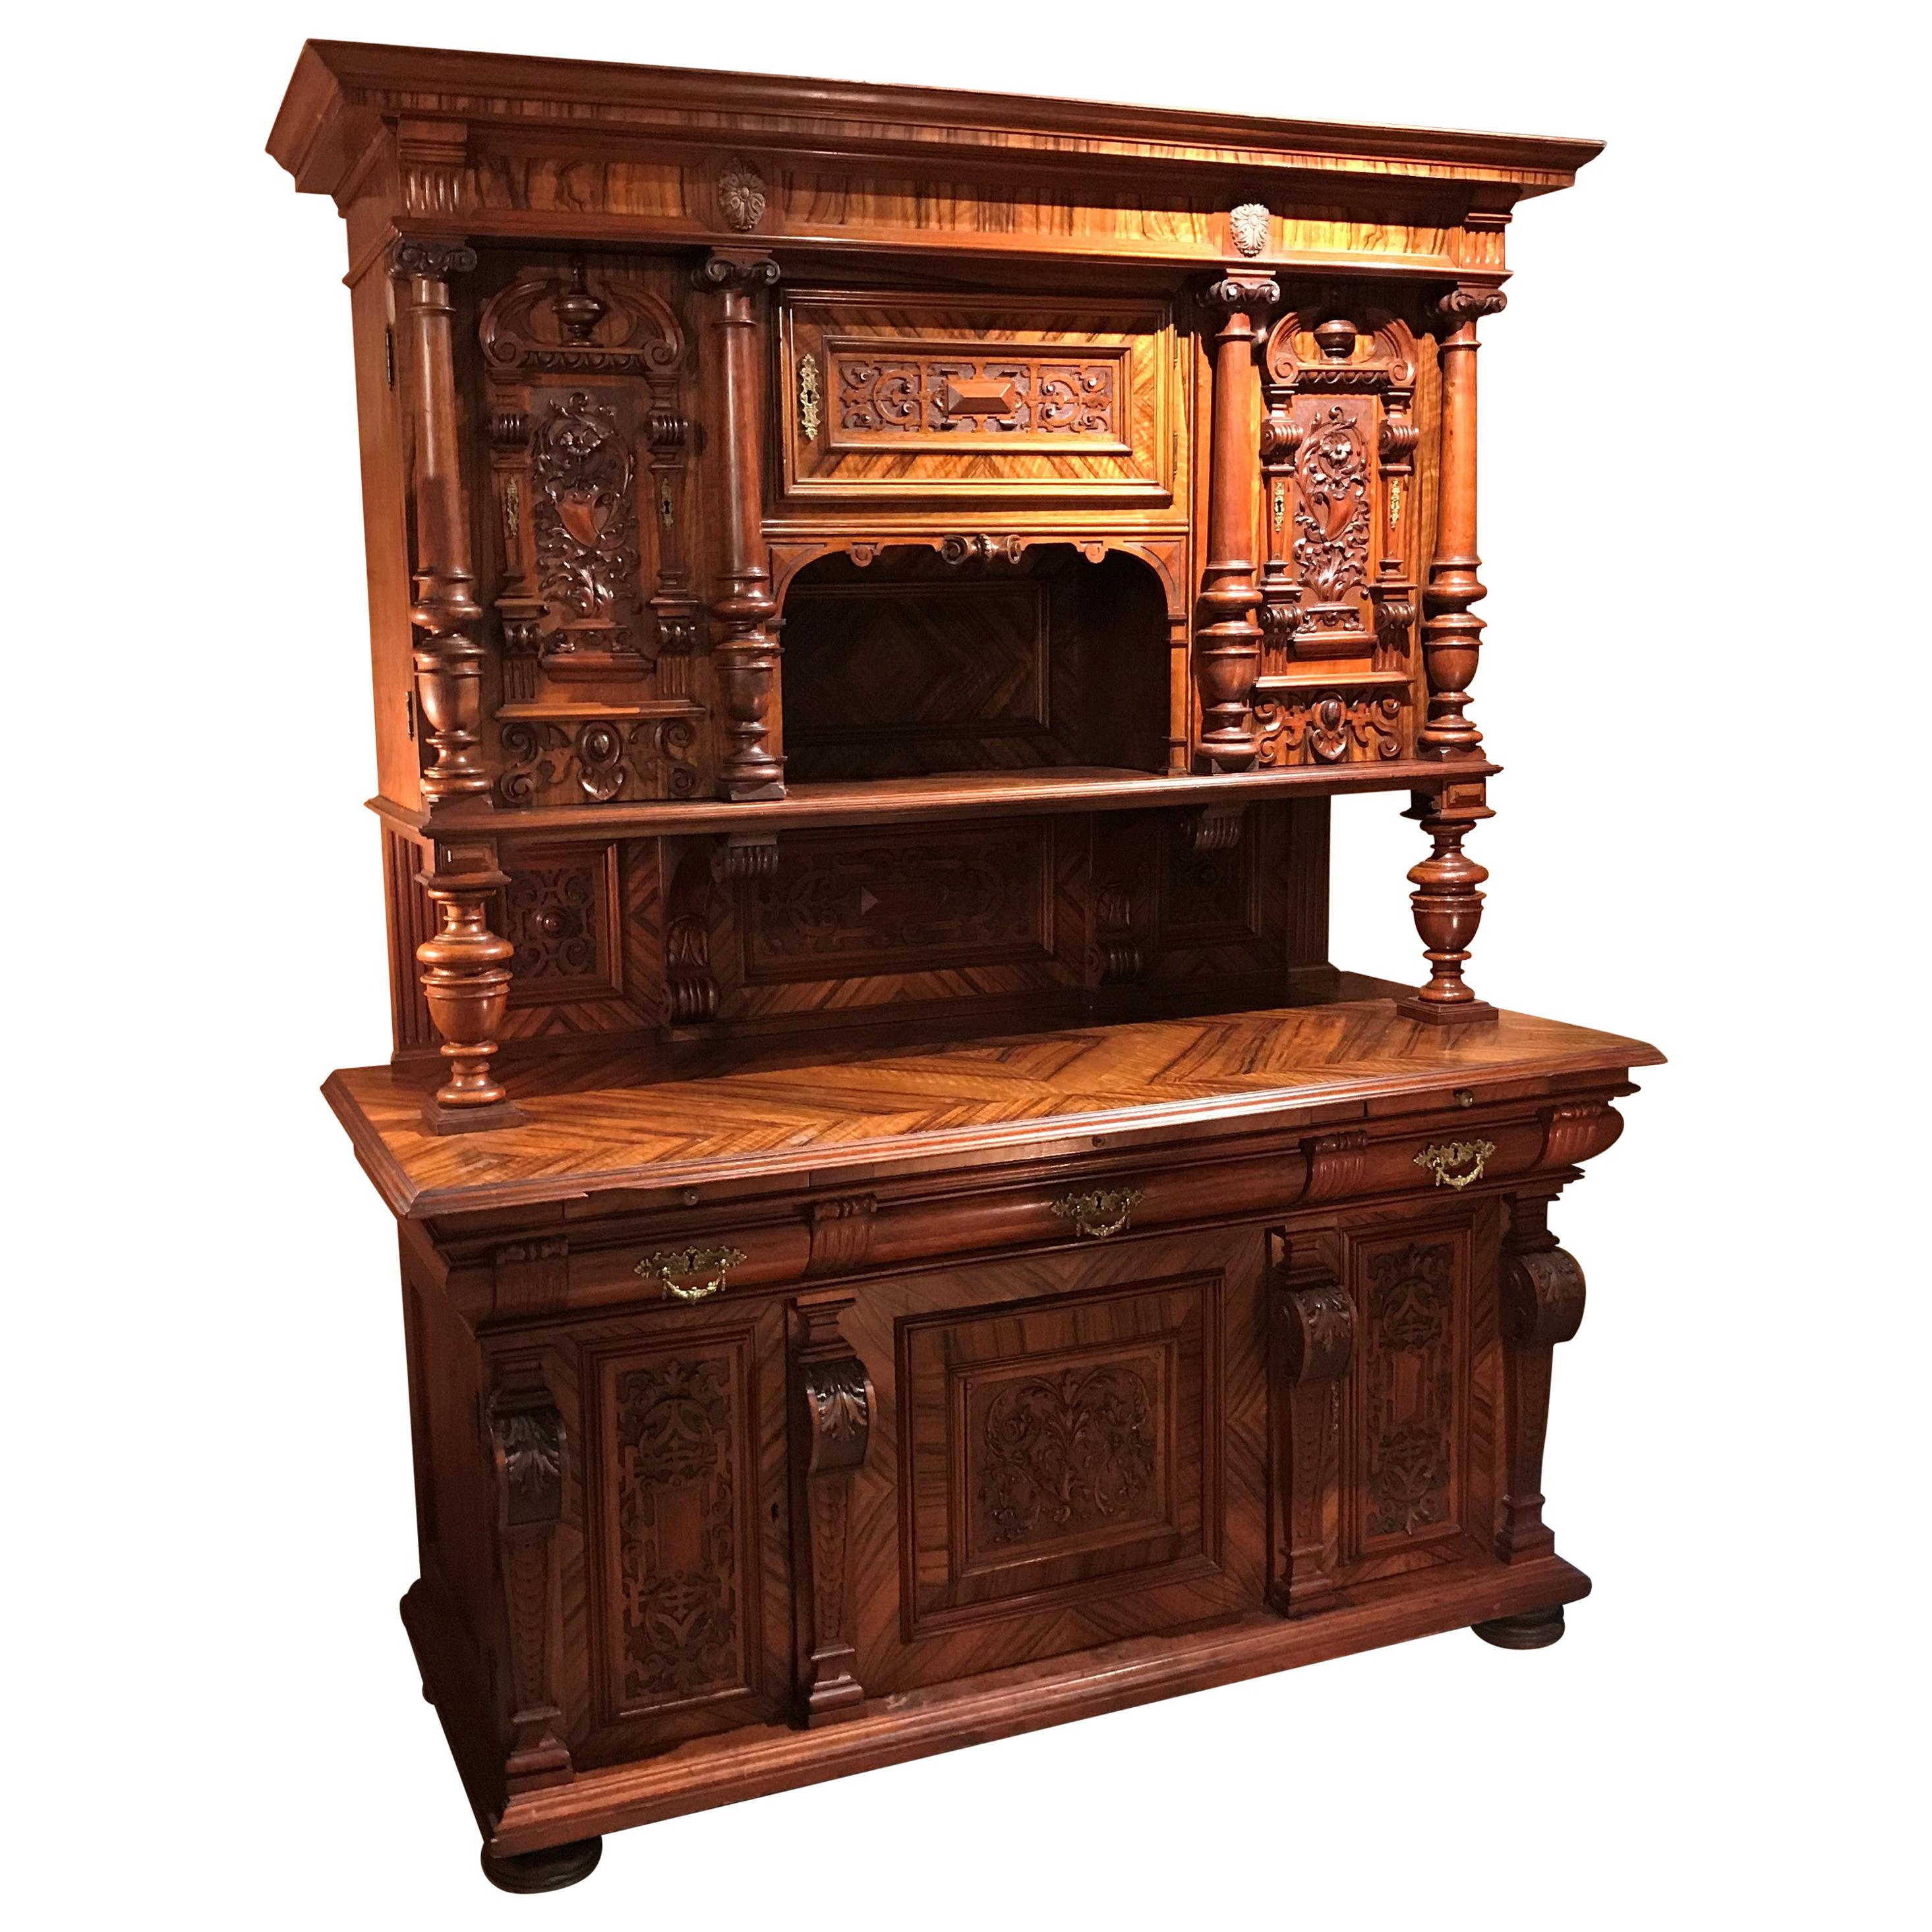 German Walnut Schrank or Cabinet with Boldly Carved Panel Doors